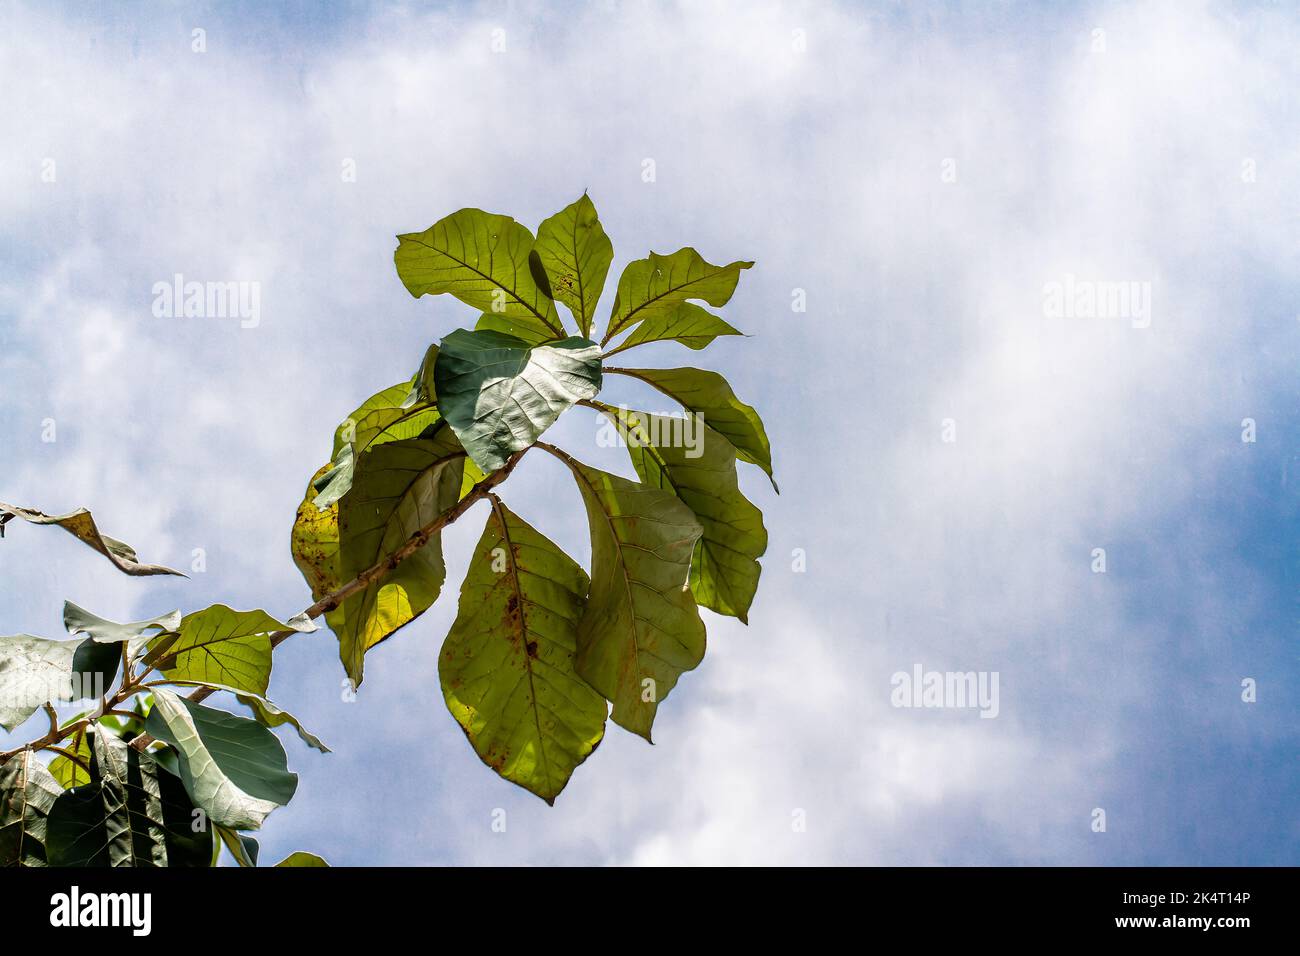 A sprig of a teak tree branch whose leaves are oval and green, isolated on a bright white sky background Stock Photo